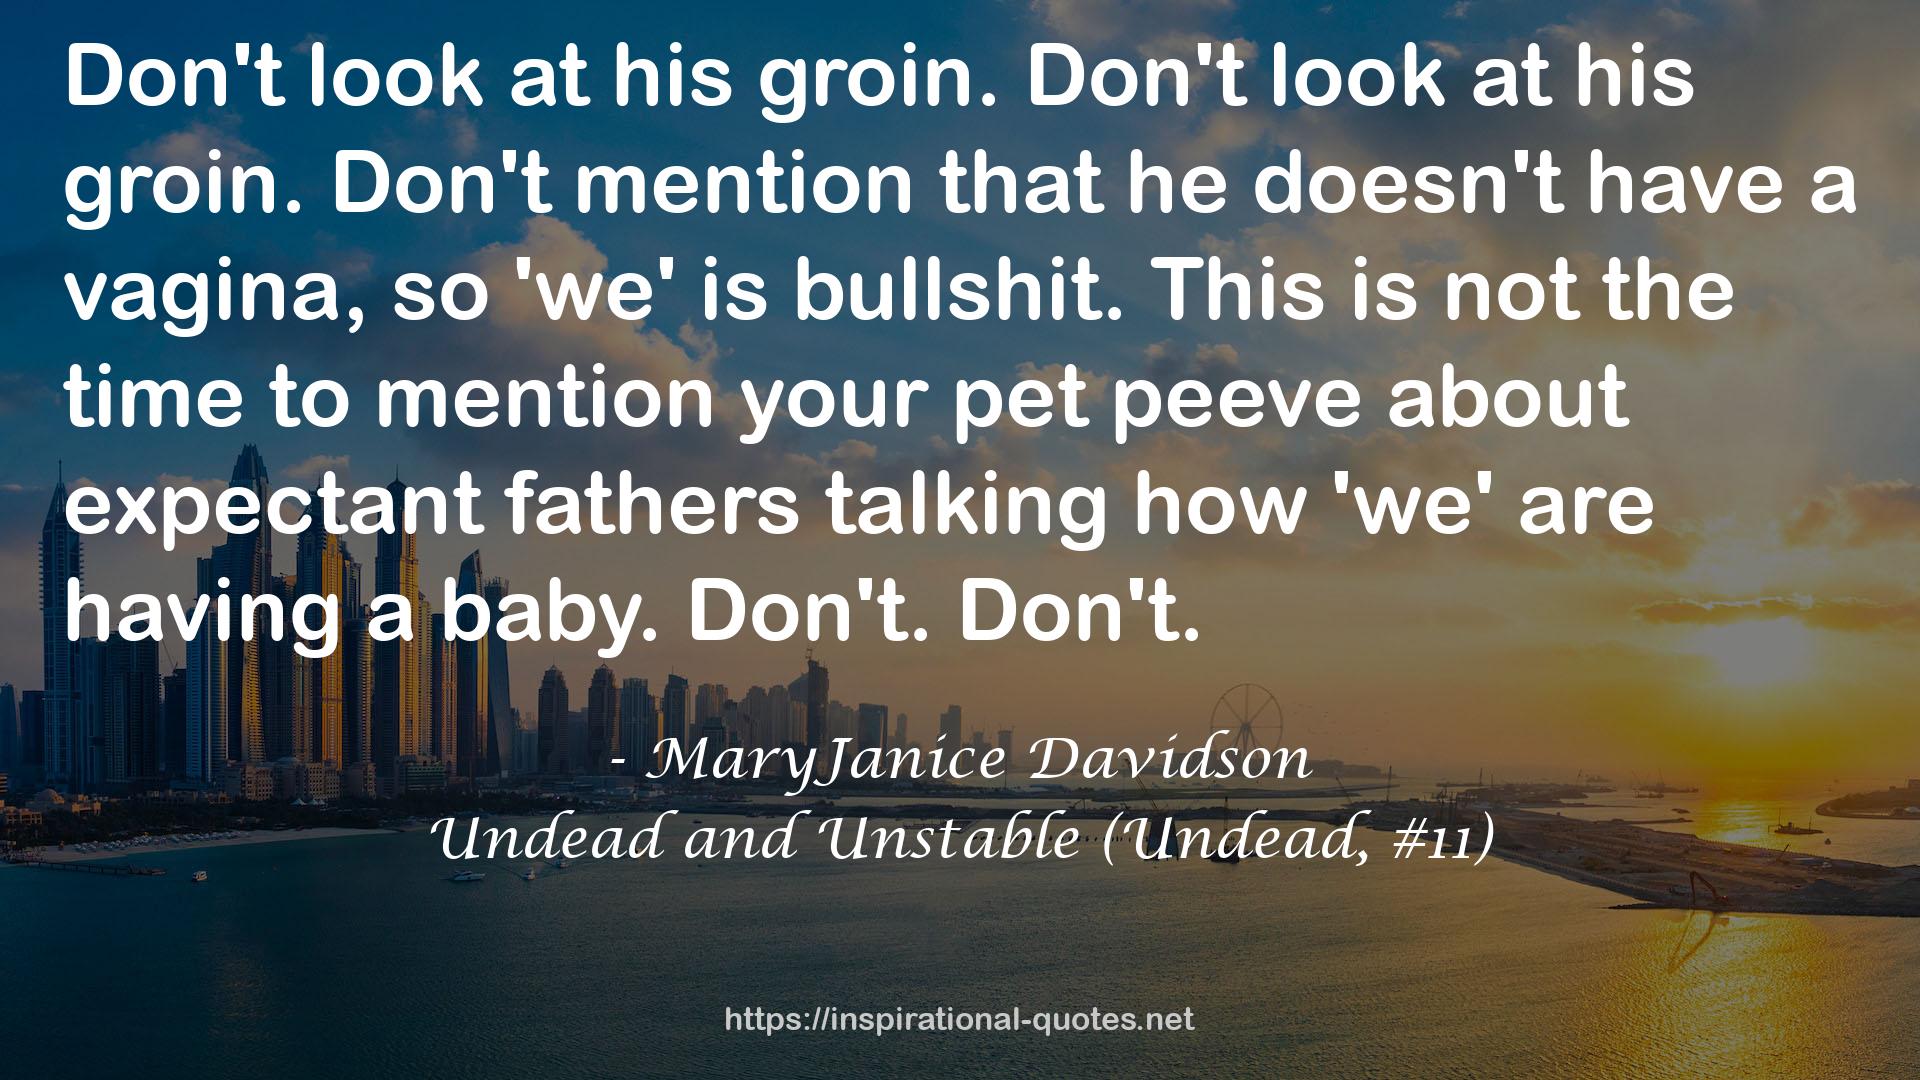 Undead and Unstable (Undead, #11) QUOTES